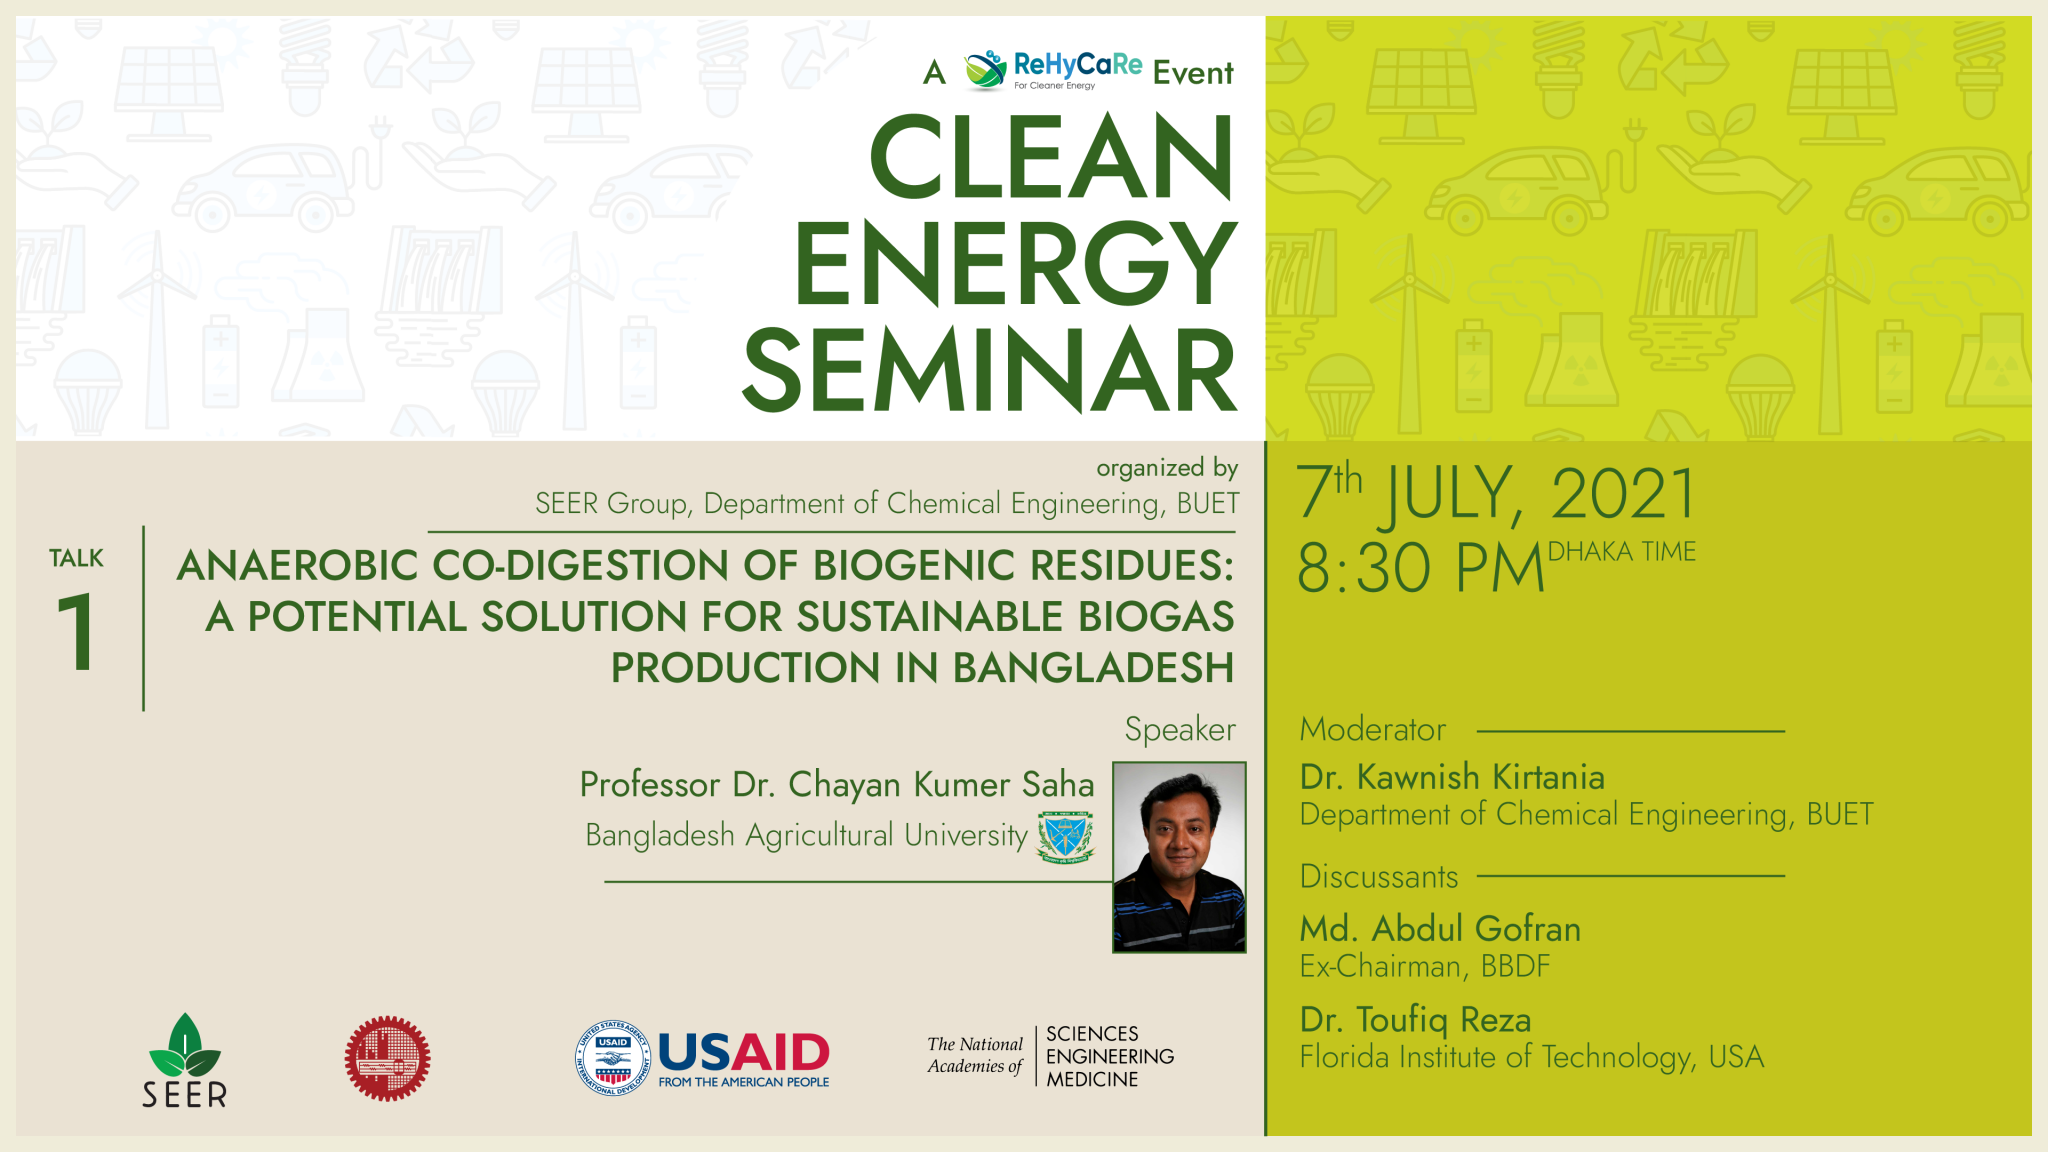 Clean Energy Seminar: Event Starts on July 7, 2021